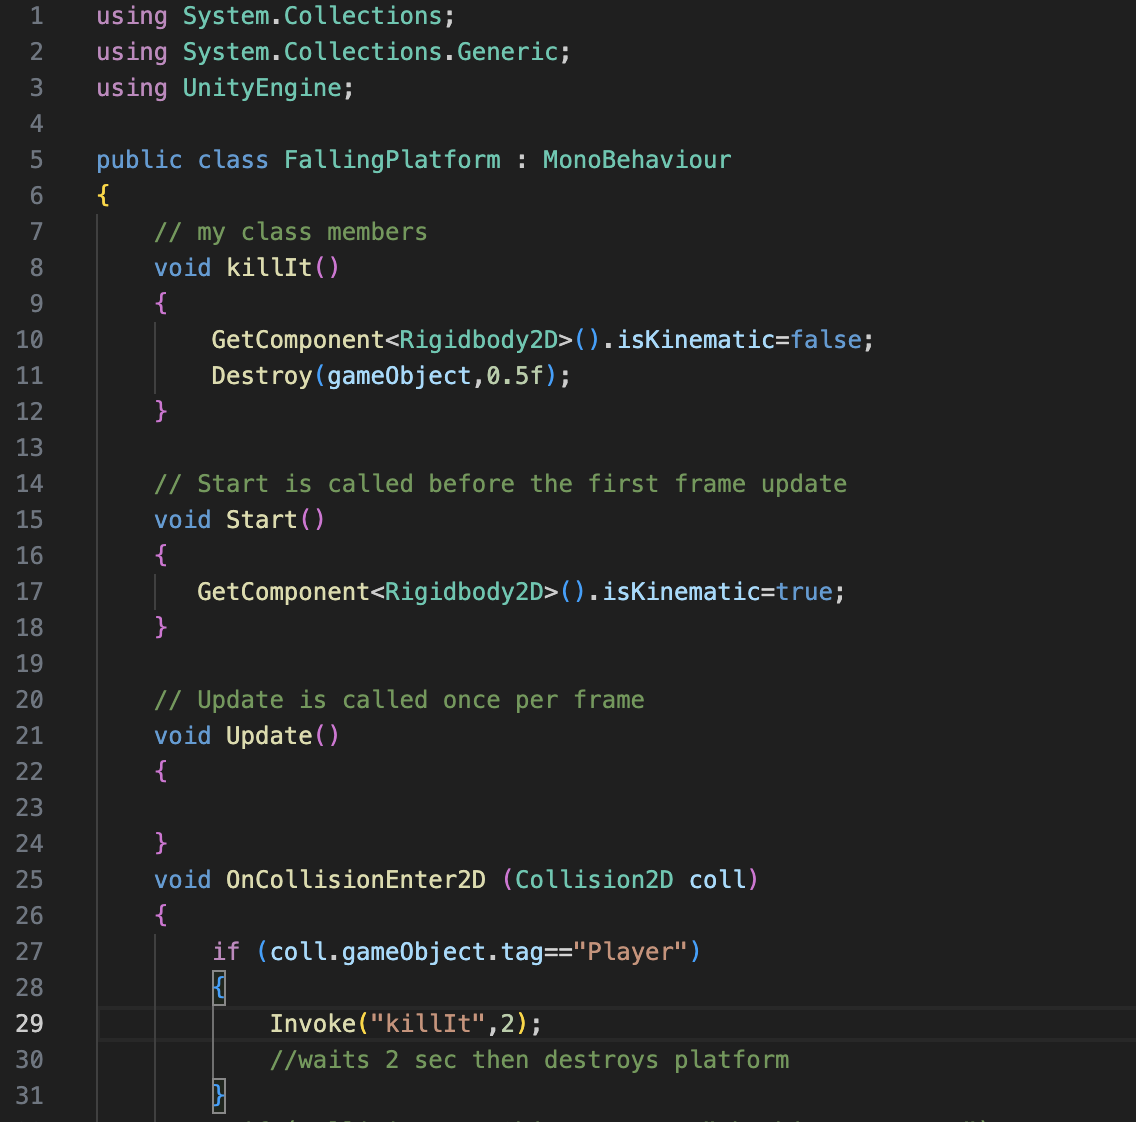 A screenshot of the C# script FallingPlatform from the game Star Bay